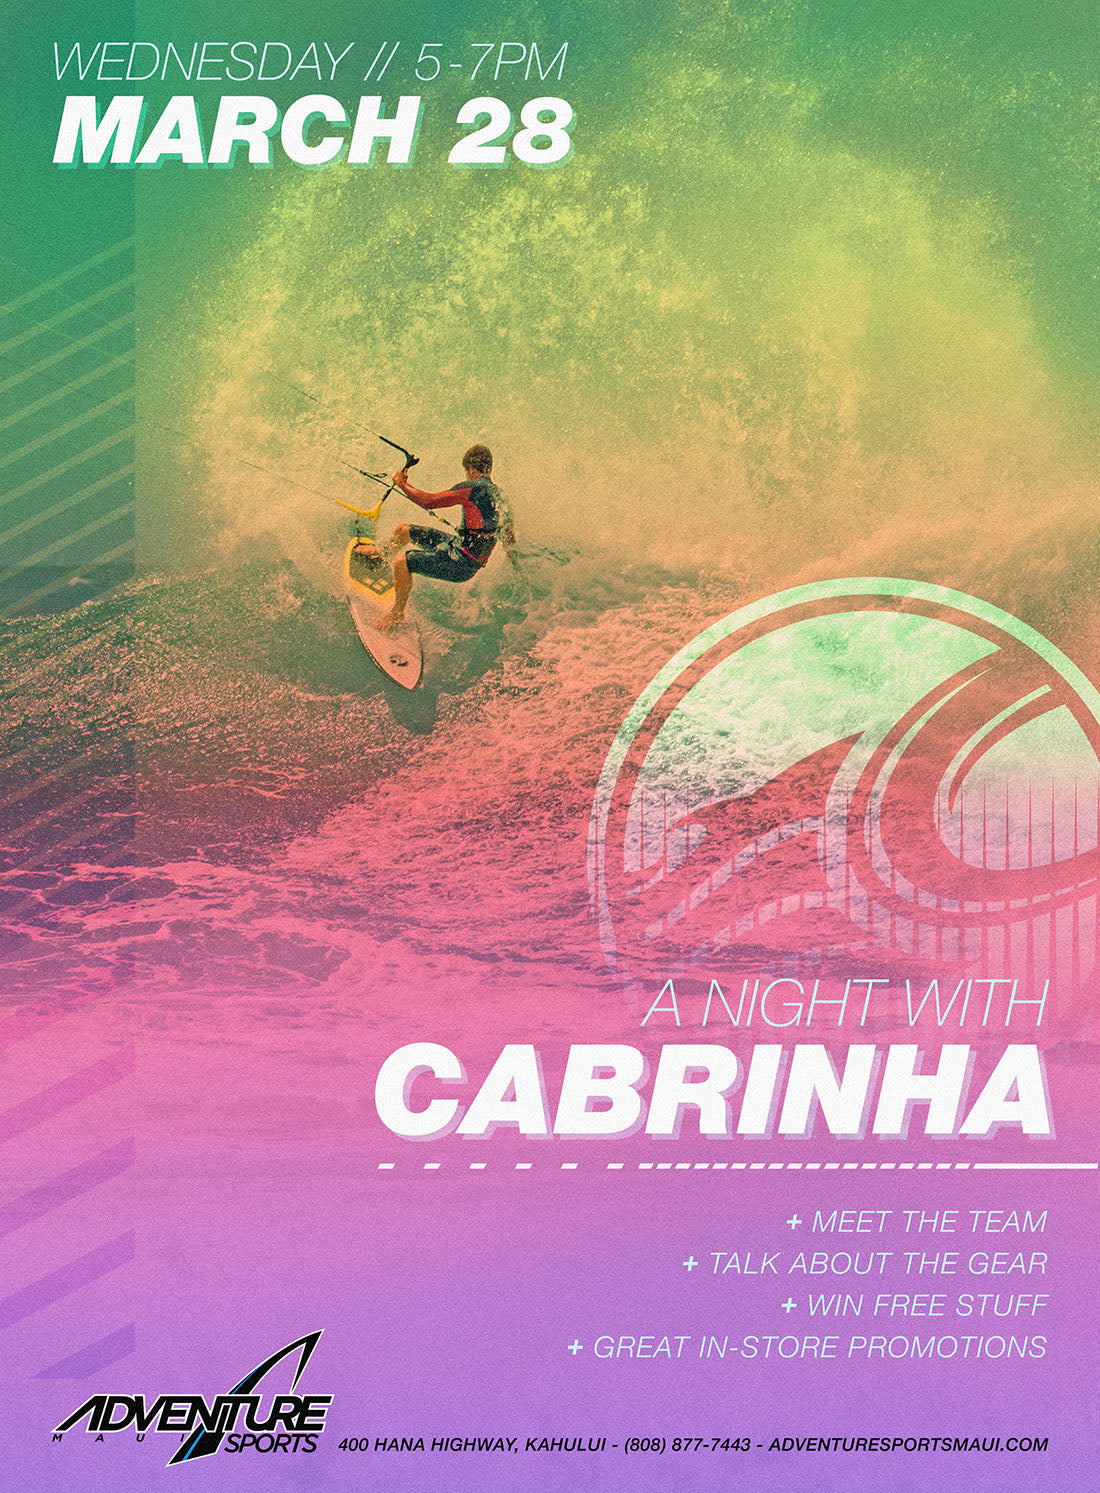 Join the Event: A Night with Cabrinha